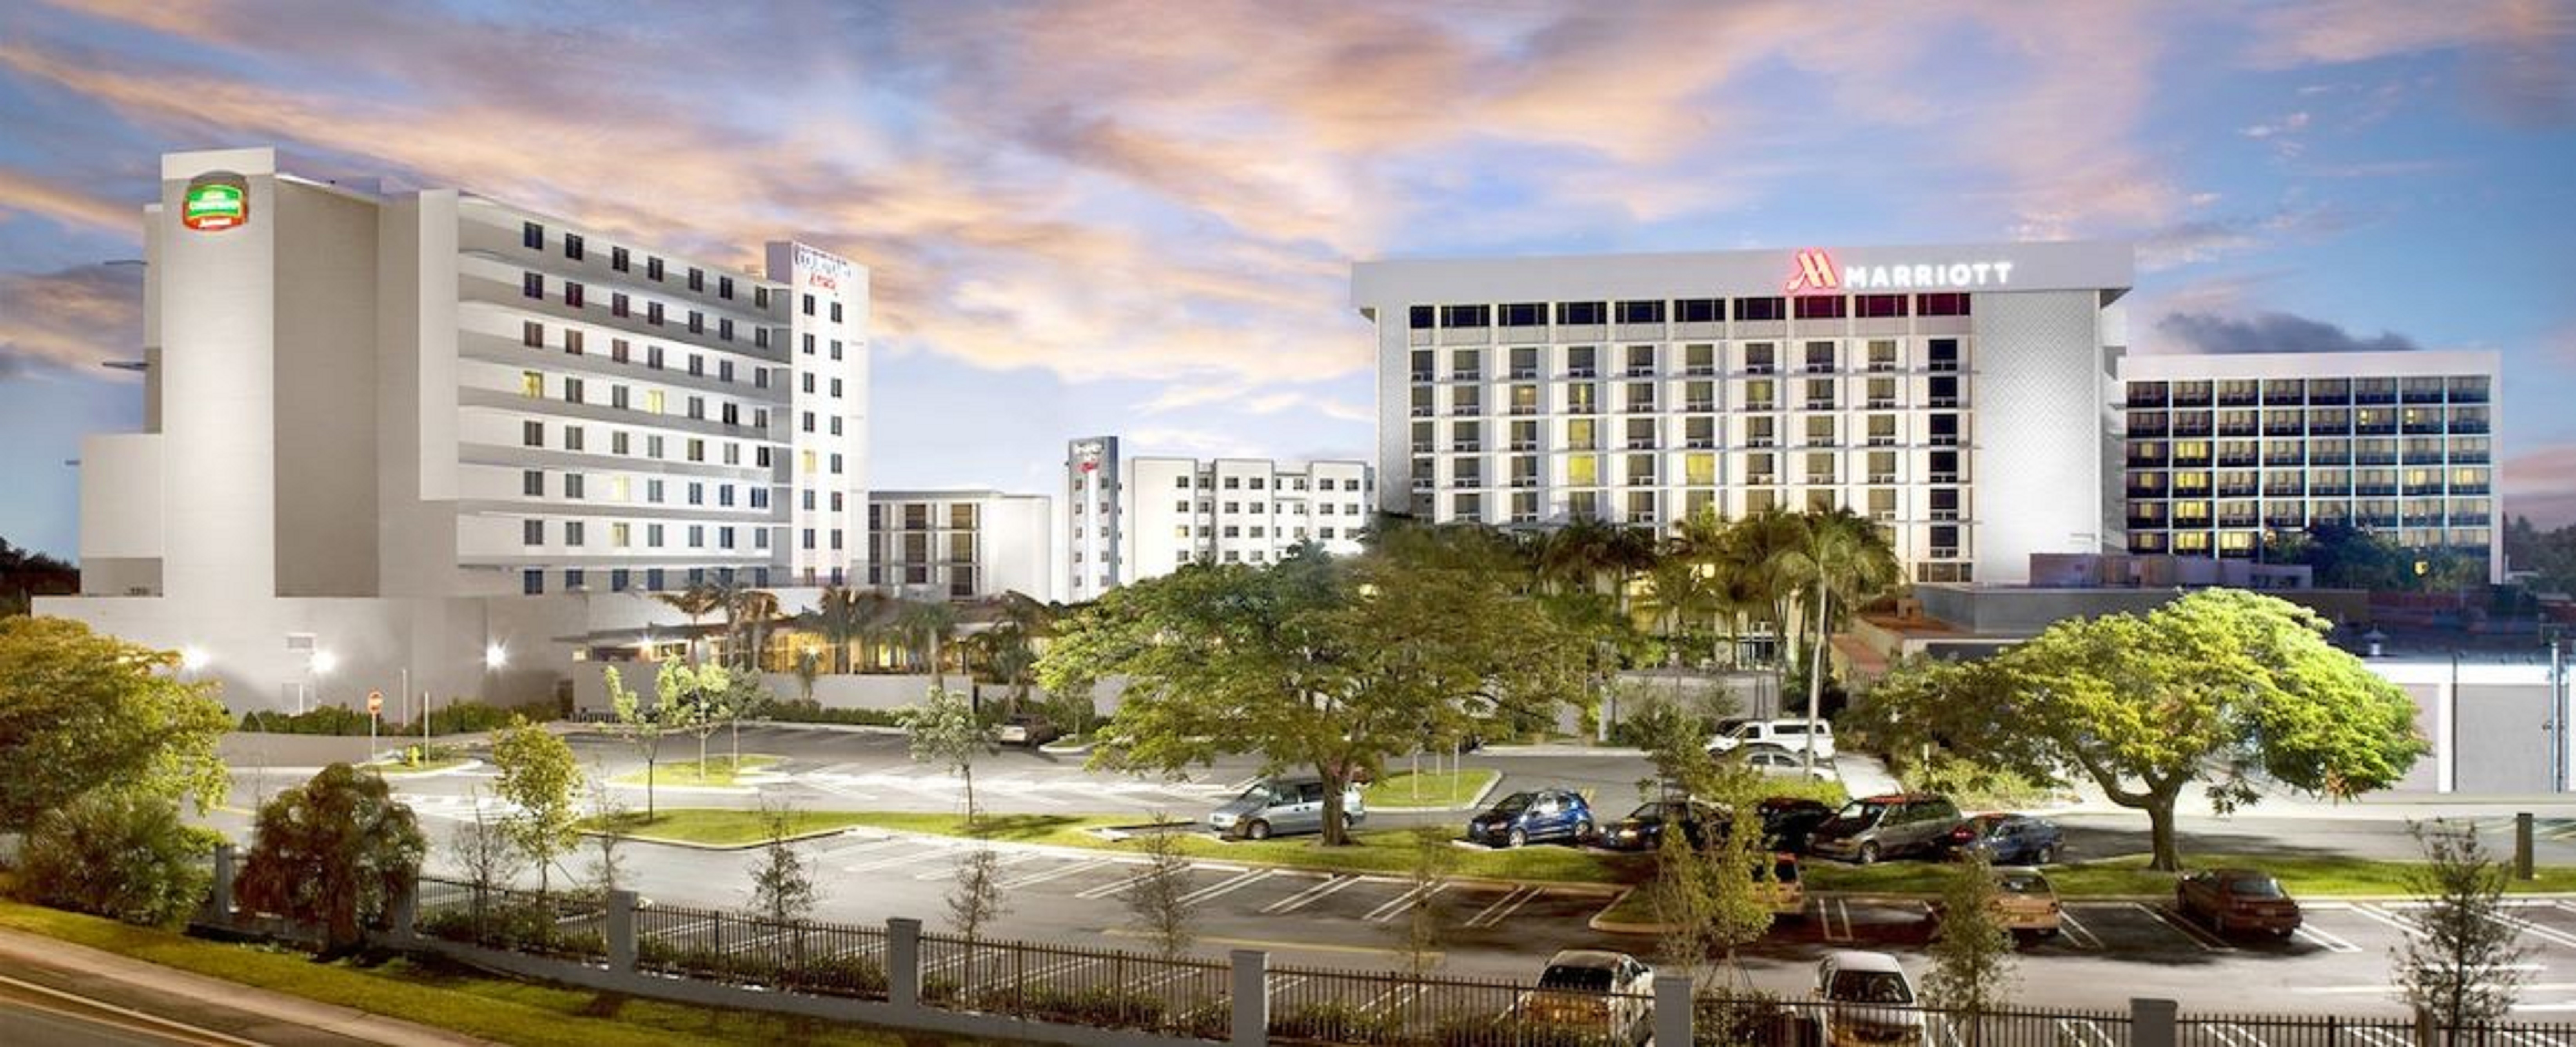 Contact US Miami Airport Marriott Marriott Bonvoy Home page